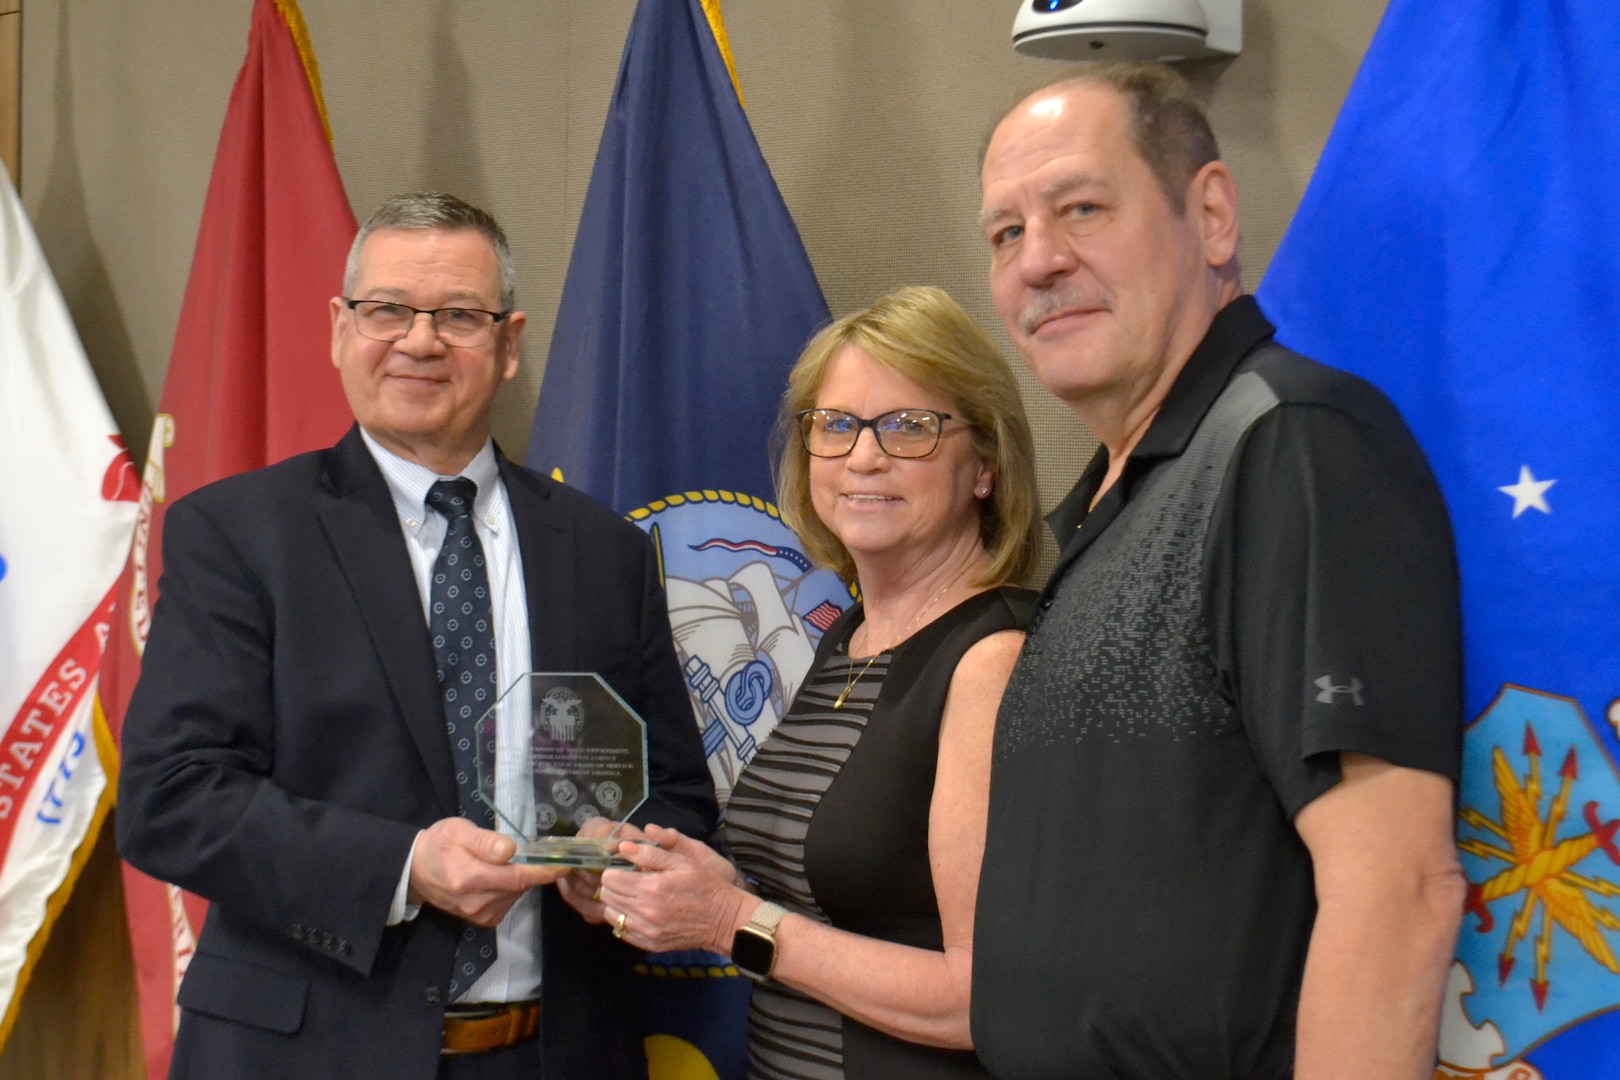 Defense Logistics Agency Troop Support Deputy Commander Richard Ellis, left, presents Shirley Kyser, center, with a retirement memento, with her husband Michael Szatkowski during a retirement ceremony March 21, 2022, in Philadelphia. Kyser is retiring after 31 years of service with the organization.